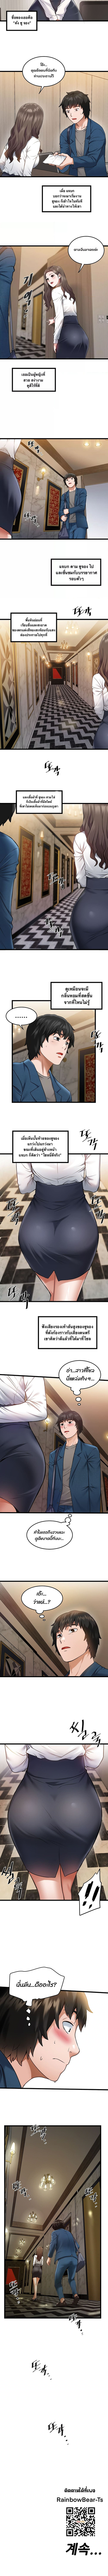 Bachelor In The Country ตอนที่ 1 ภาพ 6